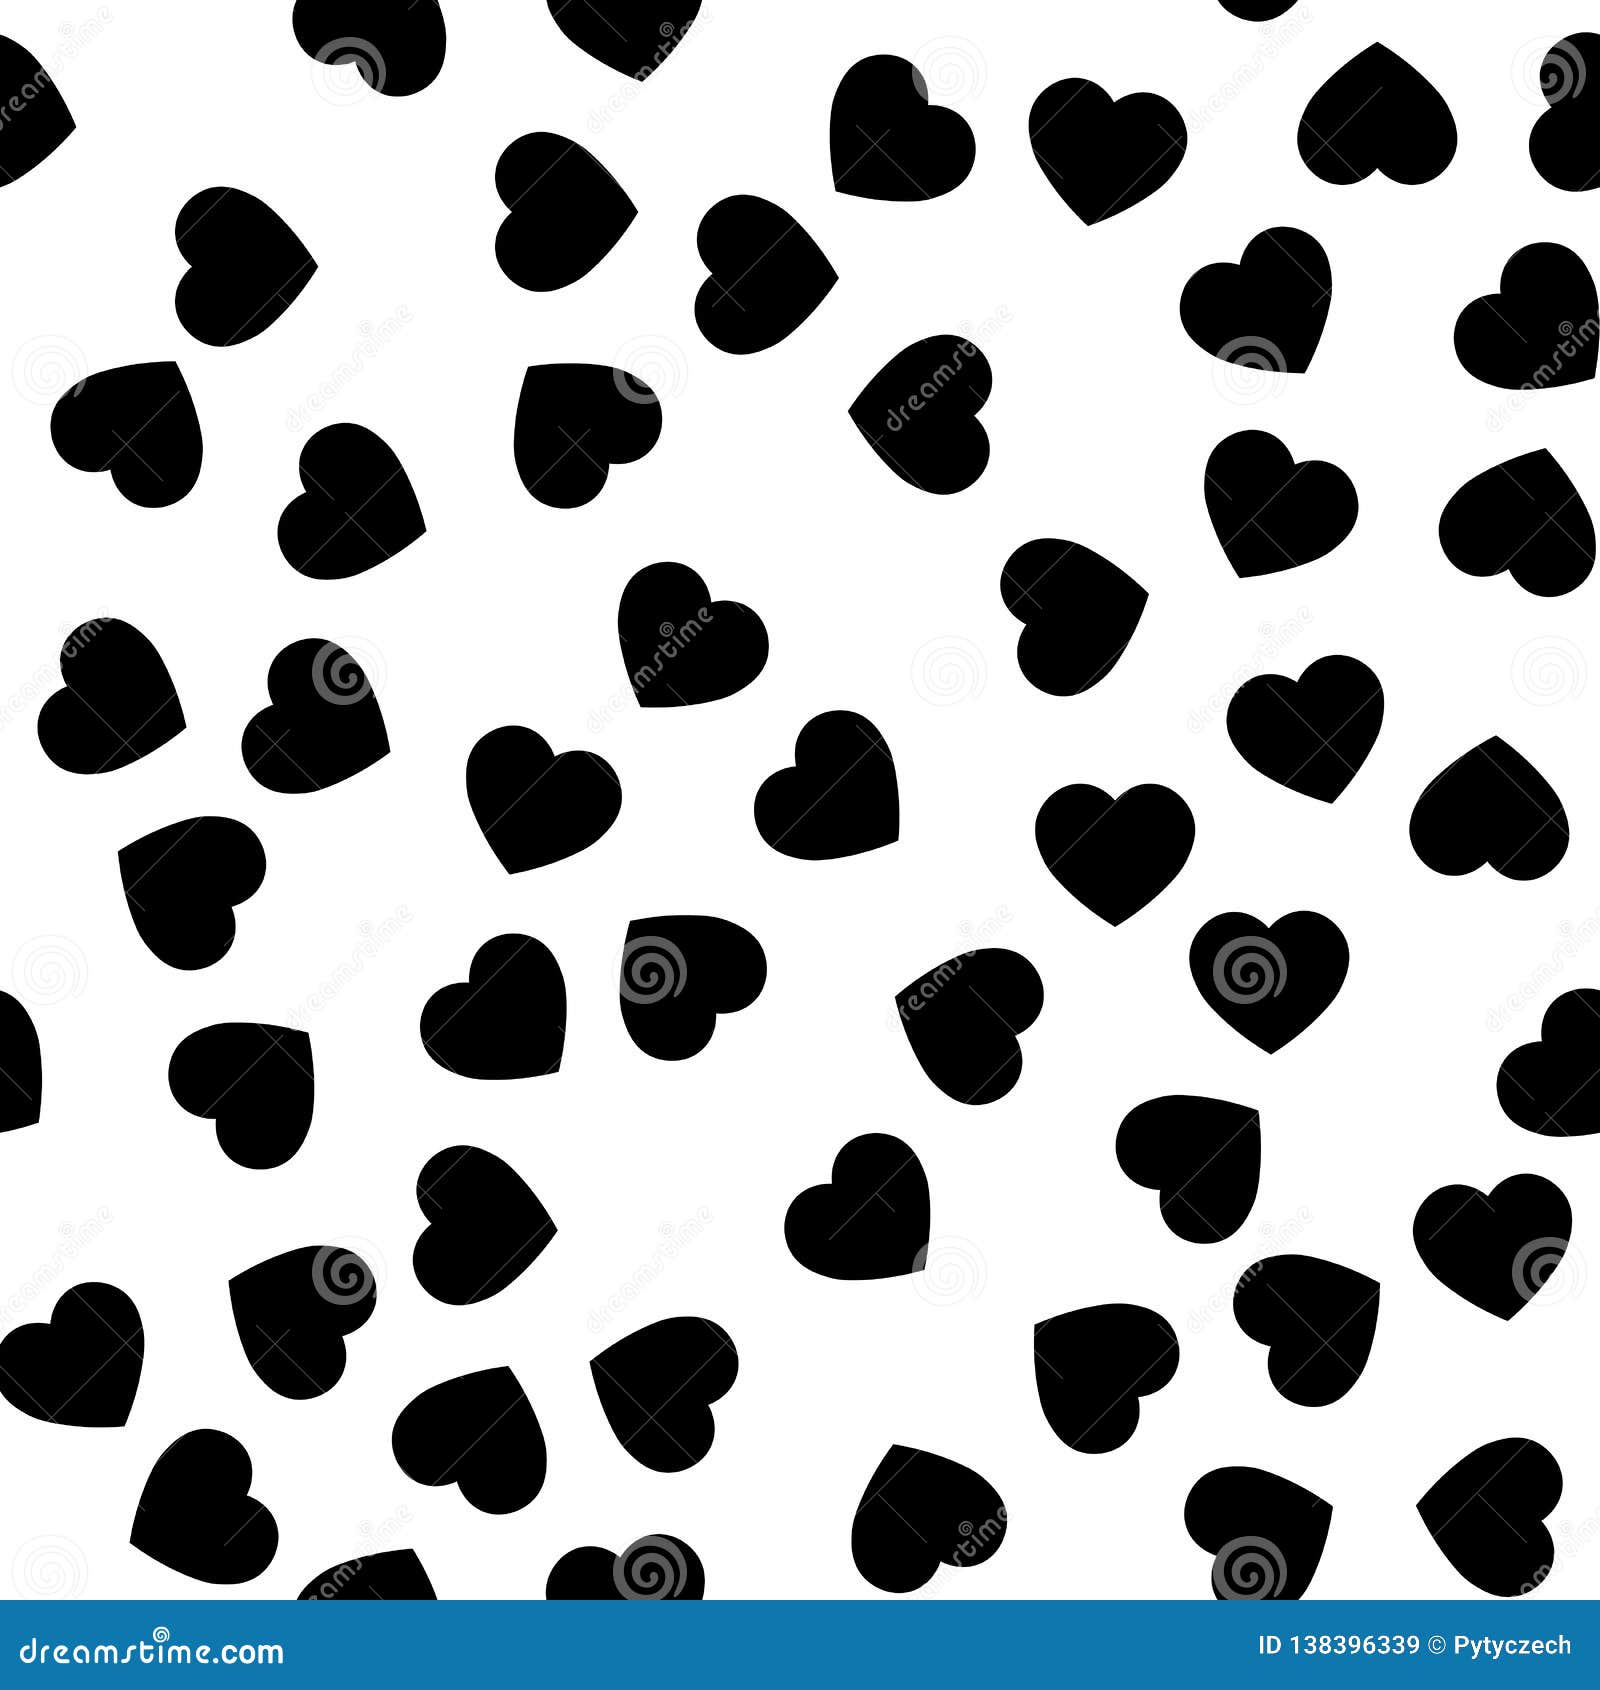 Black Heart Silhouettes Seamless Pattern. Random Scattered Hearts Background.  Love or Valentine Theme Stock Vector - Illustration of decoration,  romantic: 138396339